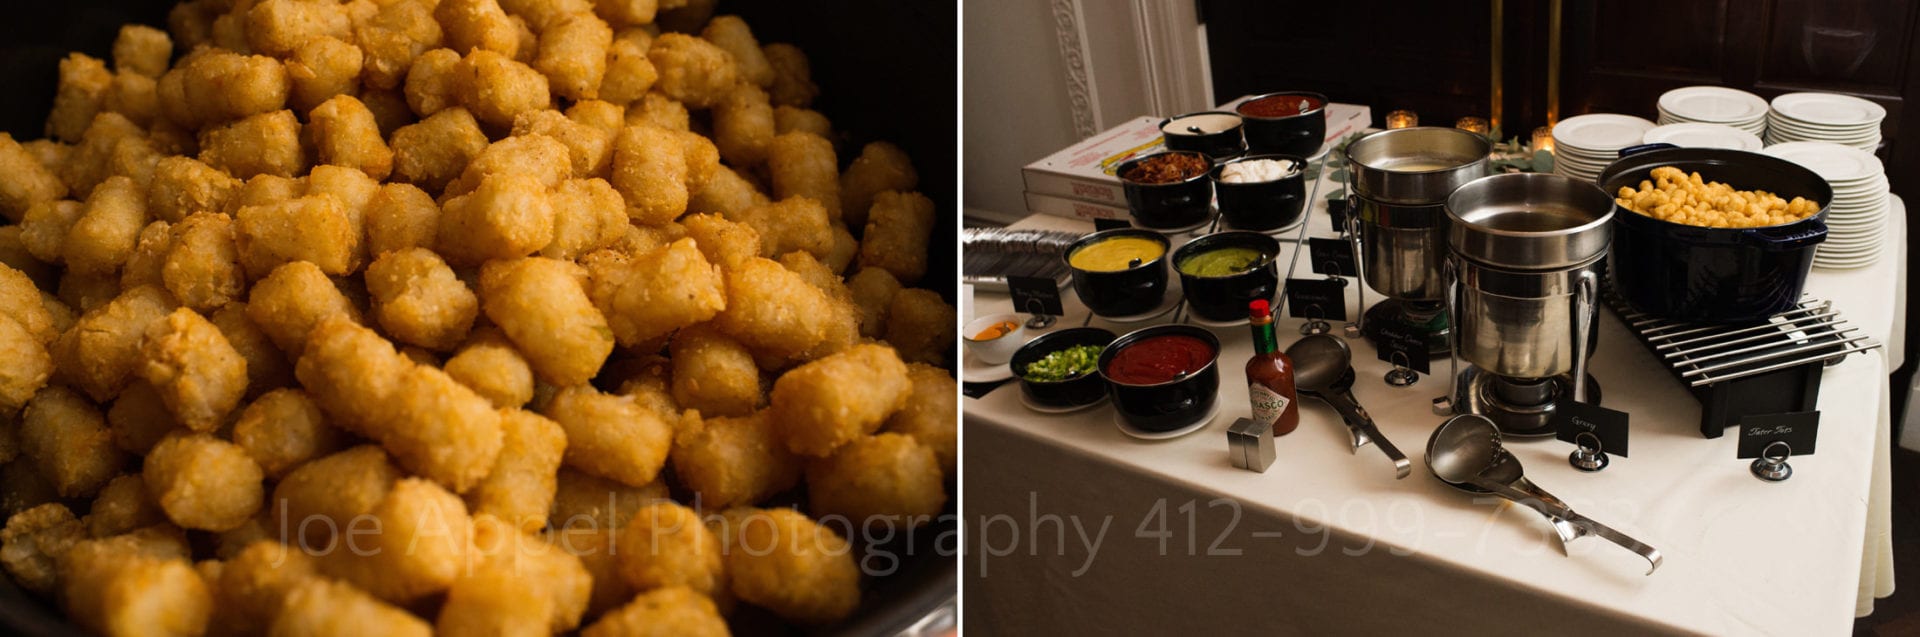 a buffet of tater tots and pizza along with sauces